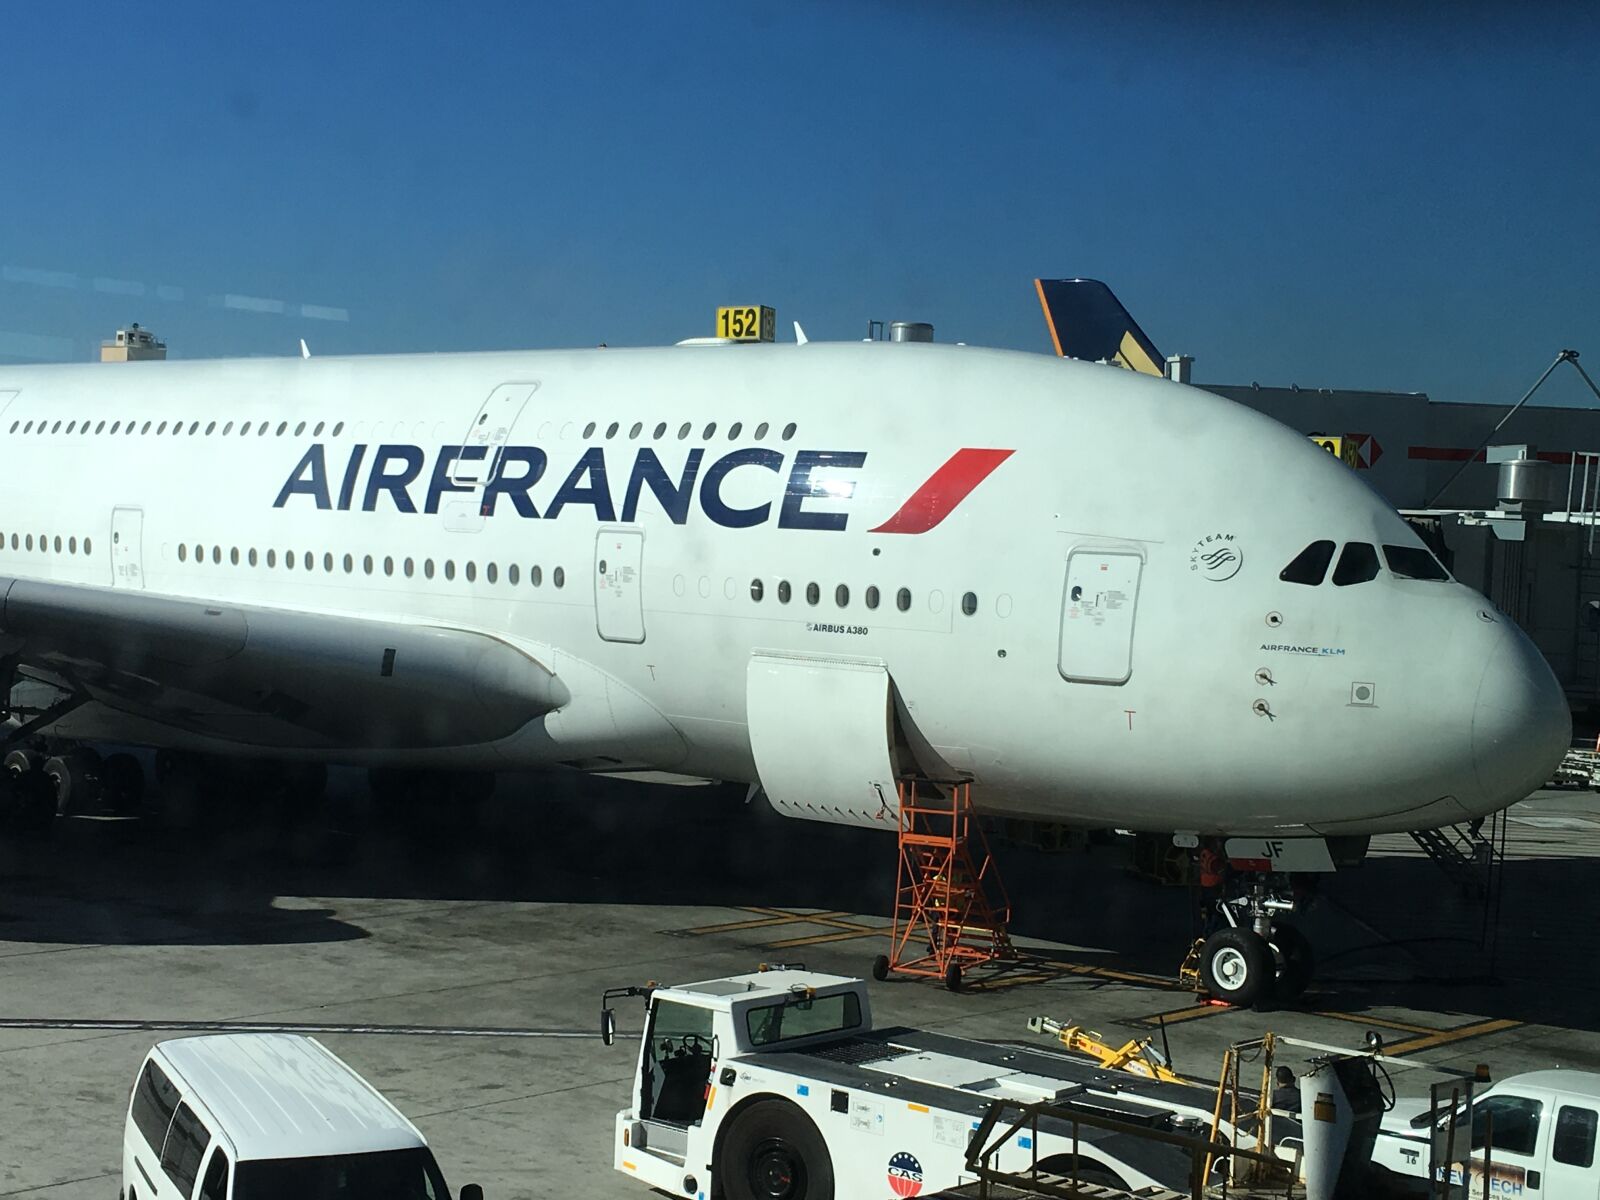 Apple iPhone 6s sample photo. Airplane, air france, airport photography